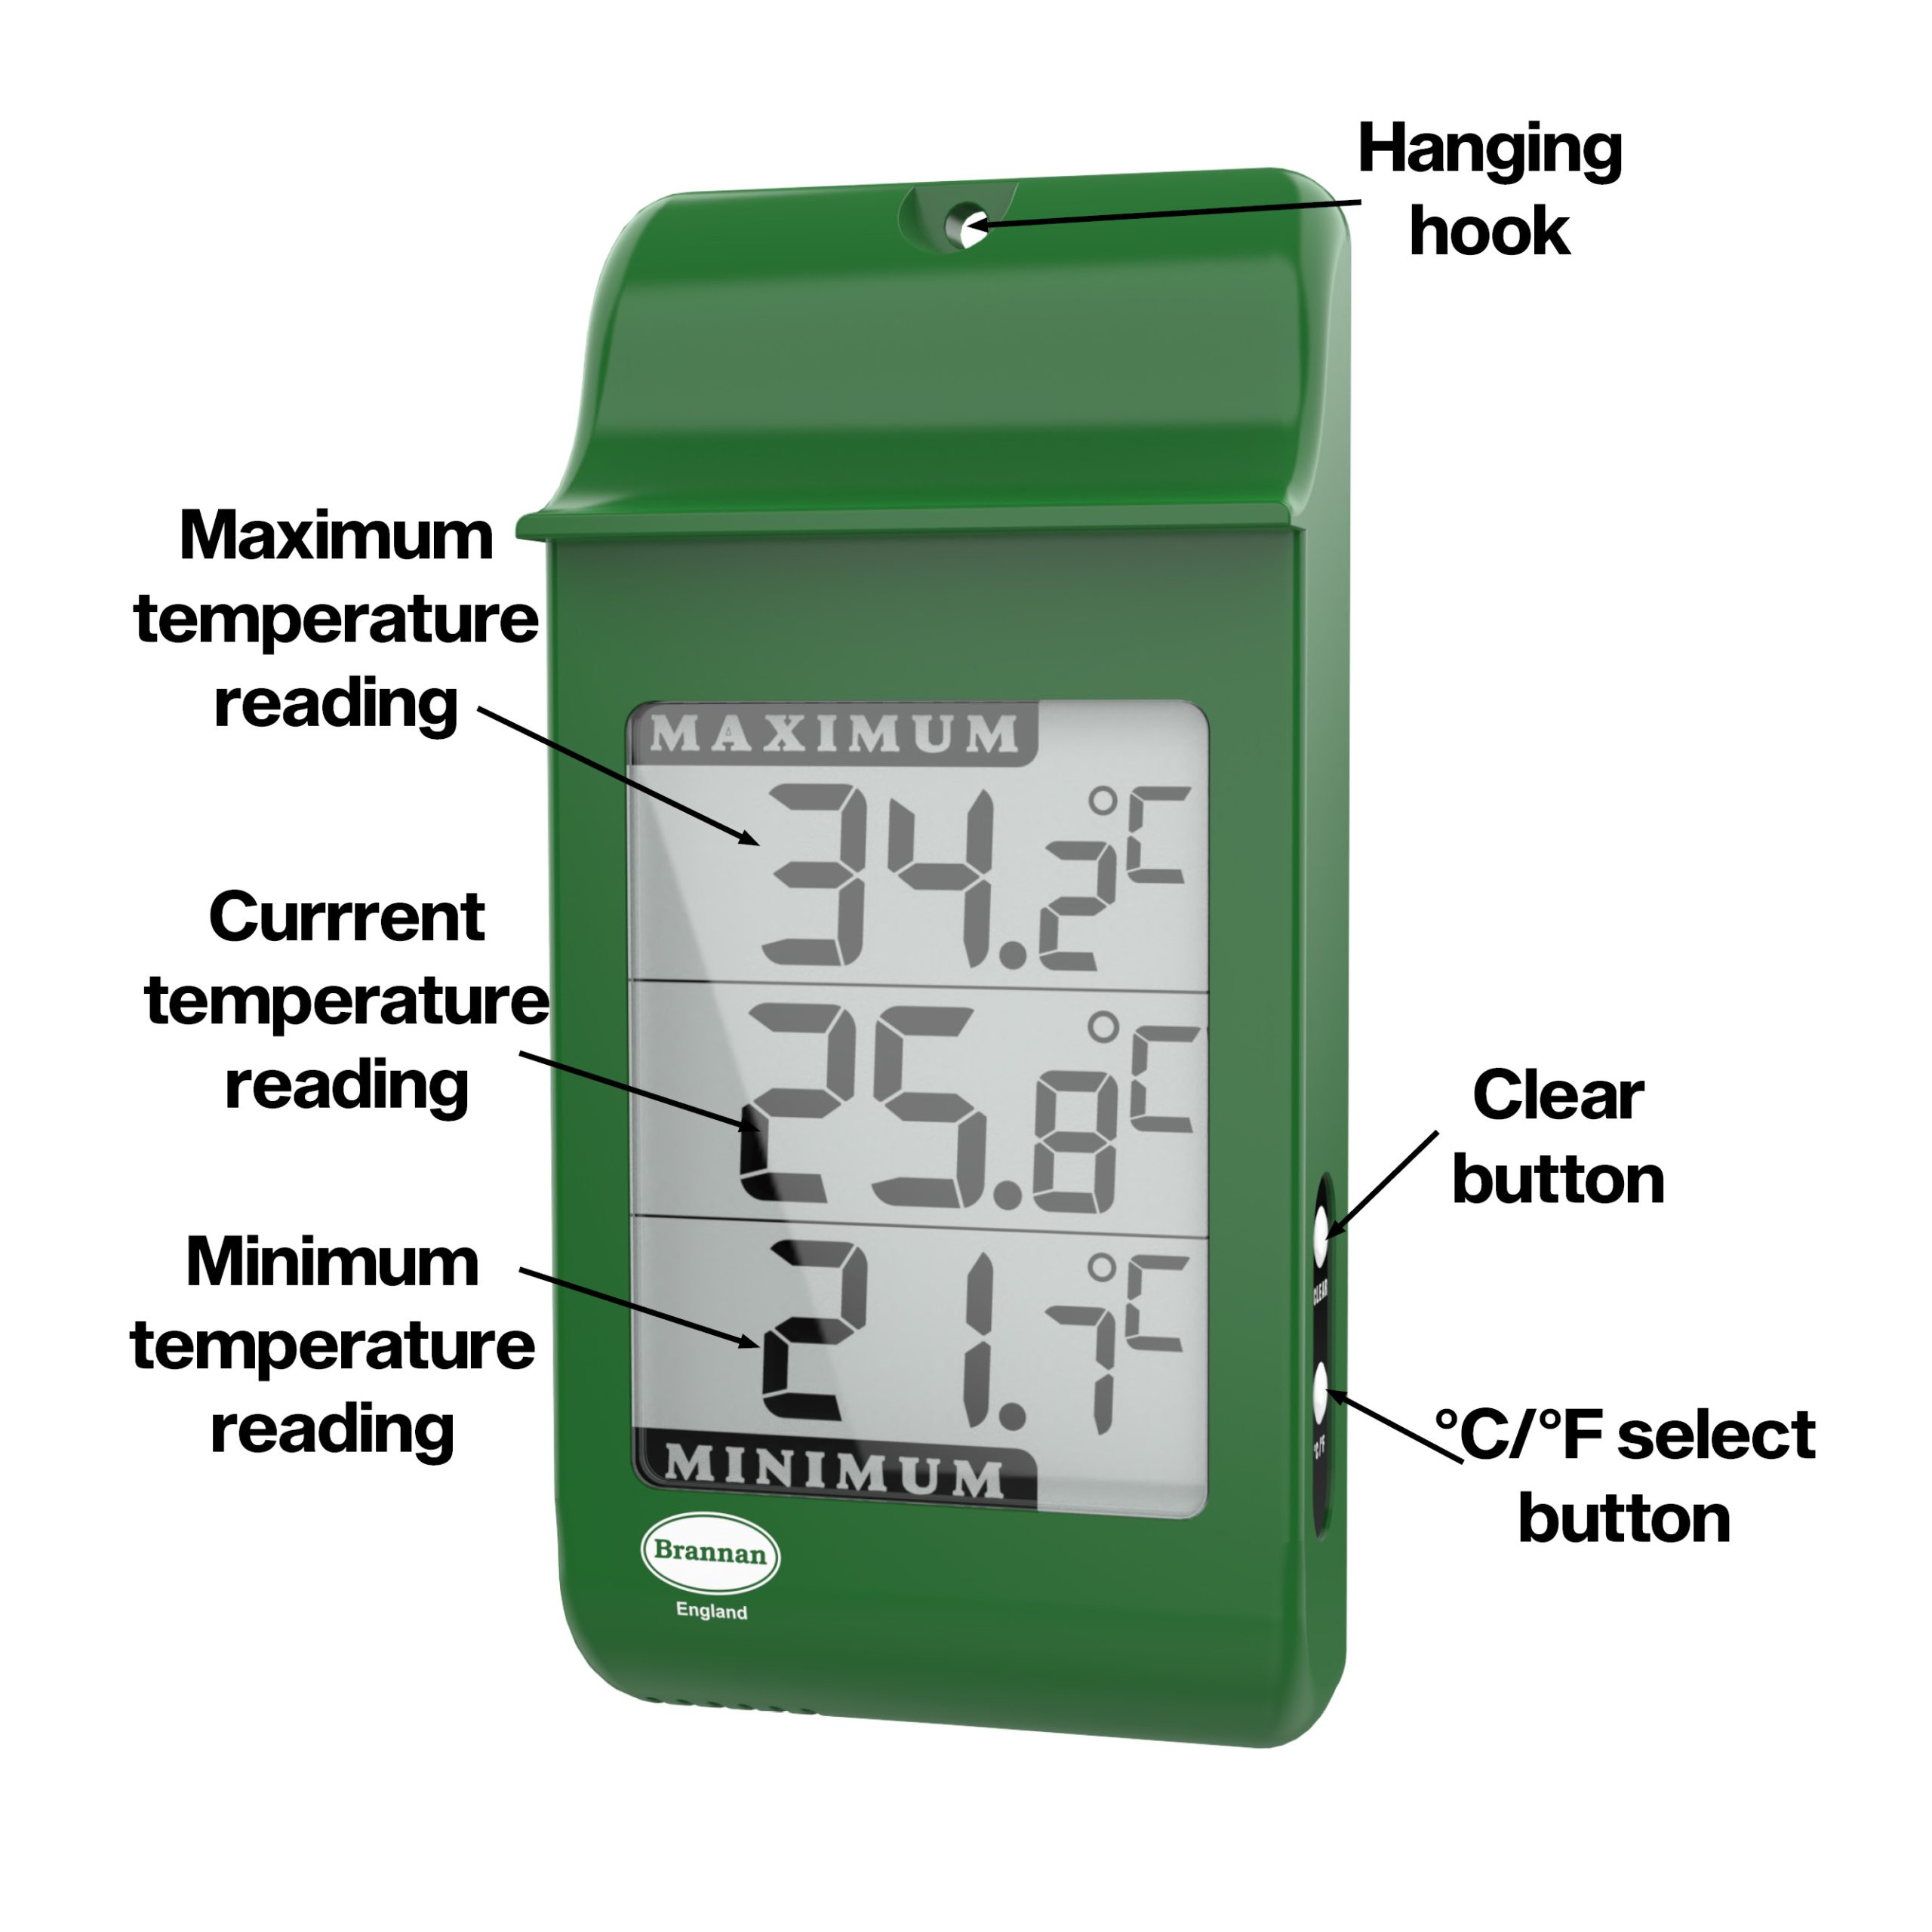 Brannan Digital Green Greenhouse Thermometer – Stylish Weatherproof Max Min  Thermometer to Monitor Maximum and Minimum Temperatures In a Garden